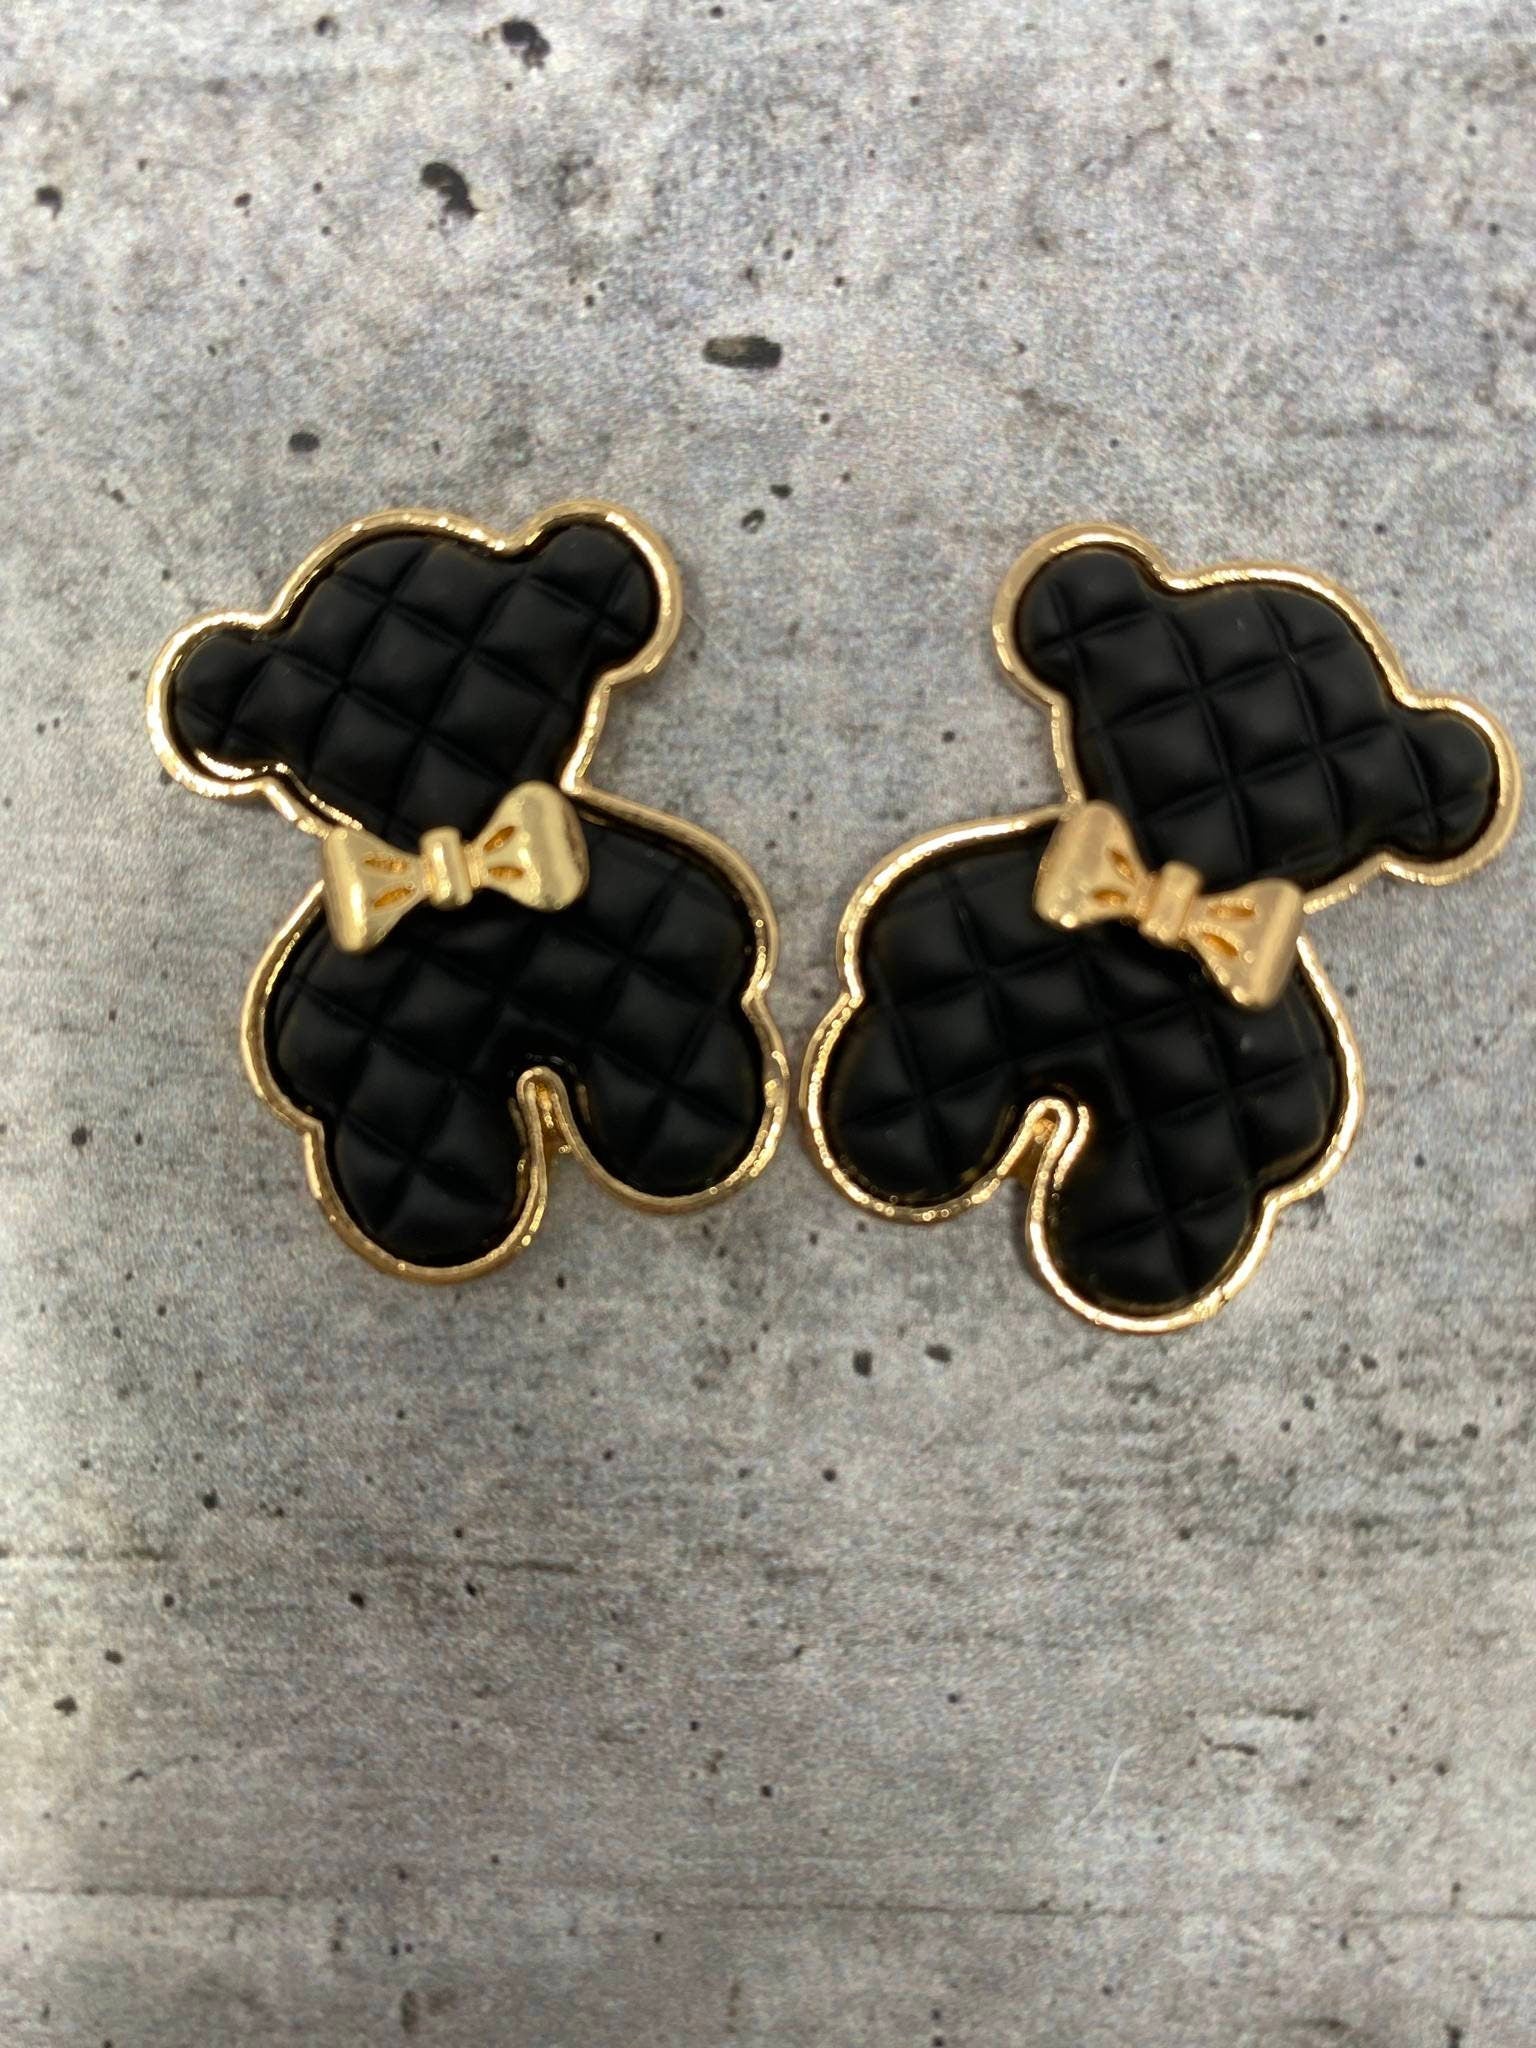 Exclusive, BLACK "Bear" Tufted w/Gold Bow Charm, 1-pc Flatback Charm for CR O CS, Phone Cases, Sunglasses, Decor, and More! Size 2"